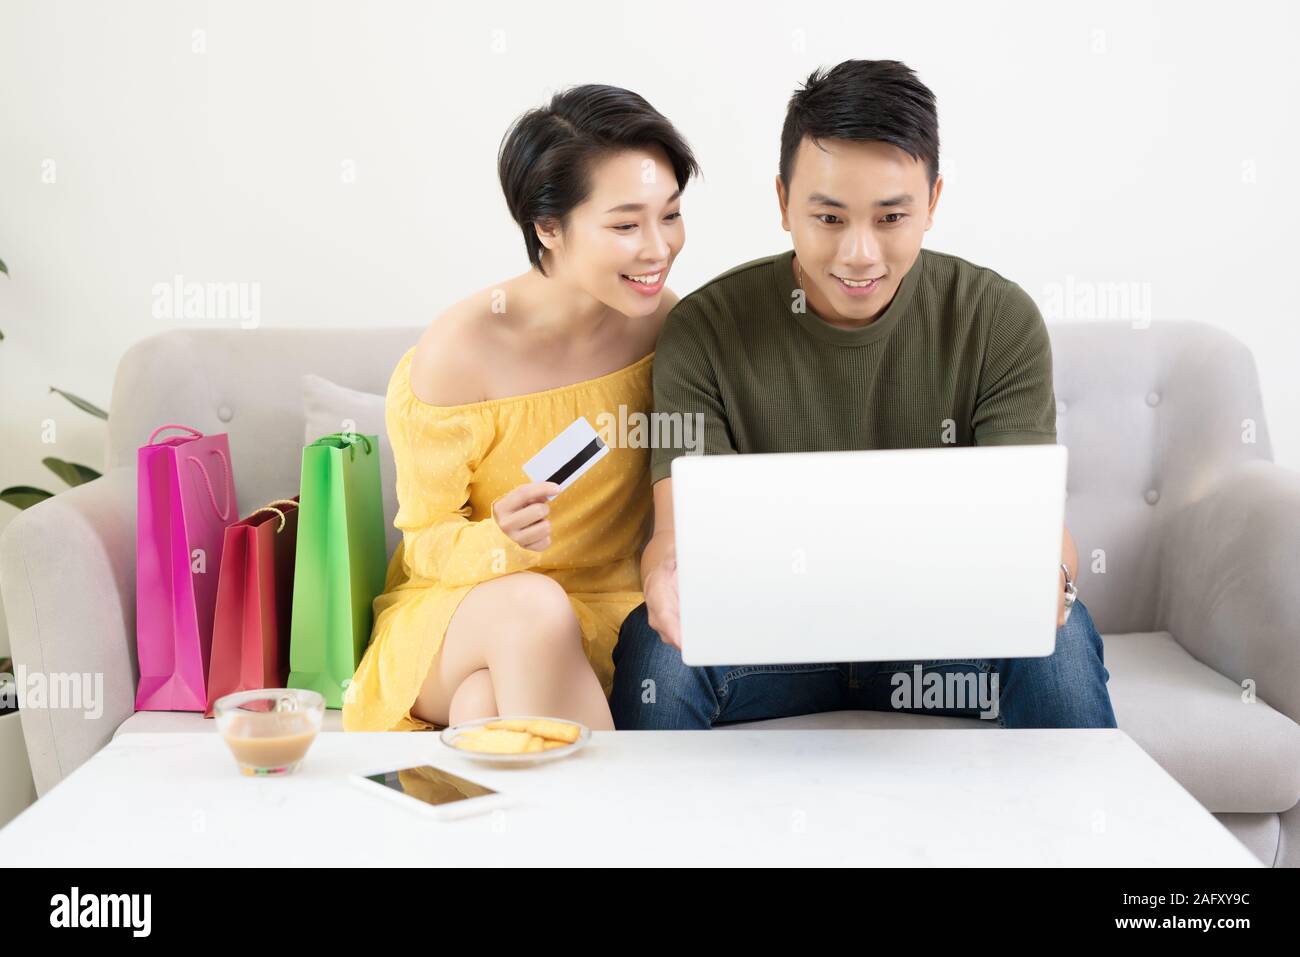 Young Asian Couple Making Online Purchases On Laptop At Home Stock Photo